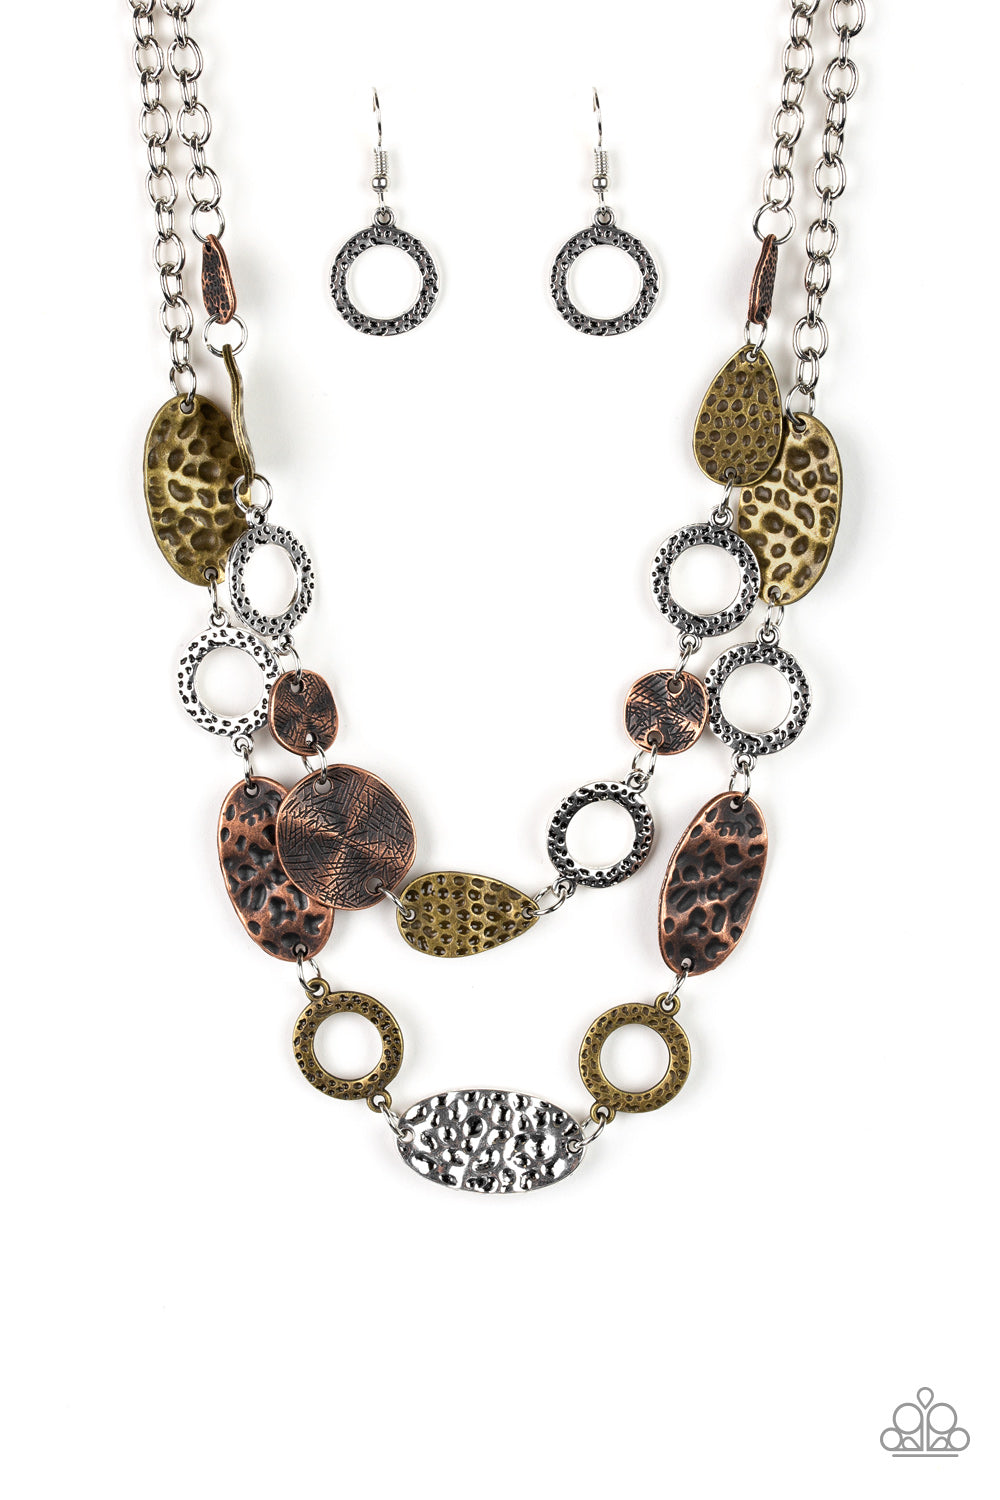 Trippin On Texture - Multi - Spiffy Chick Jewelry